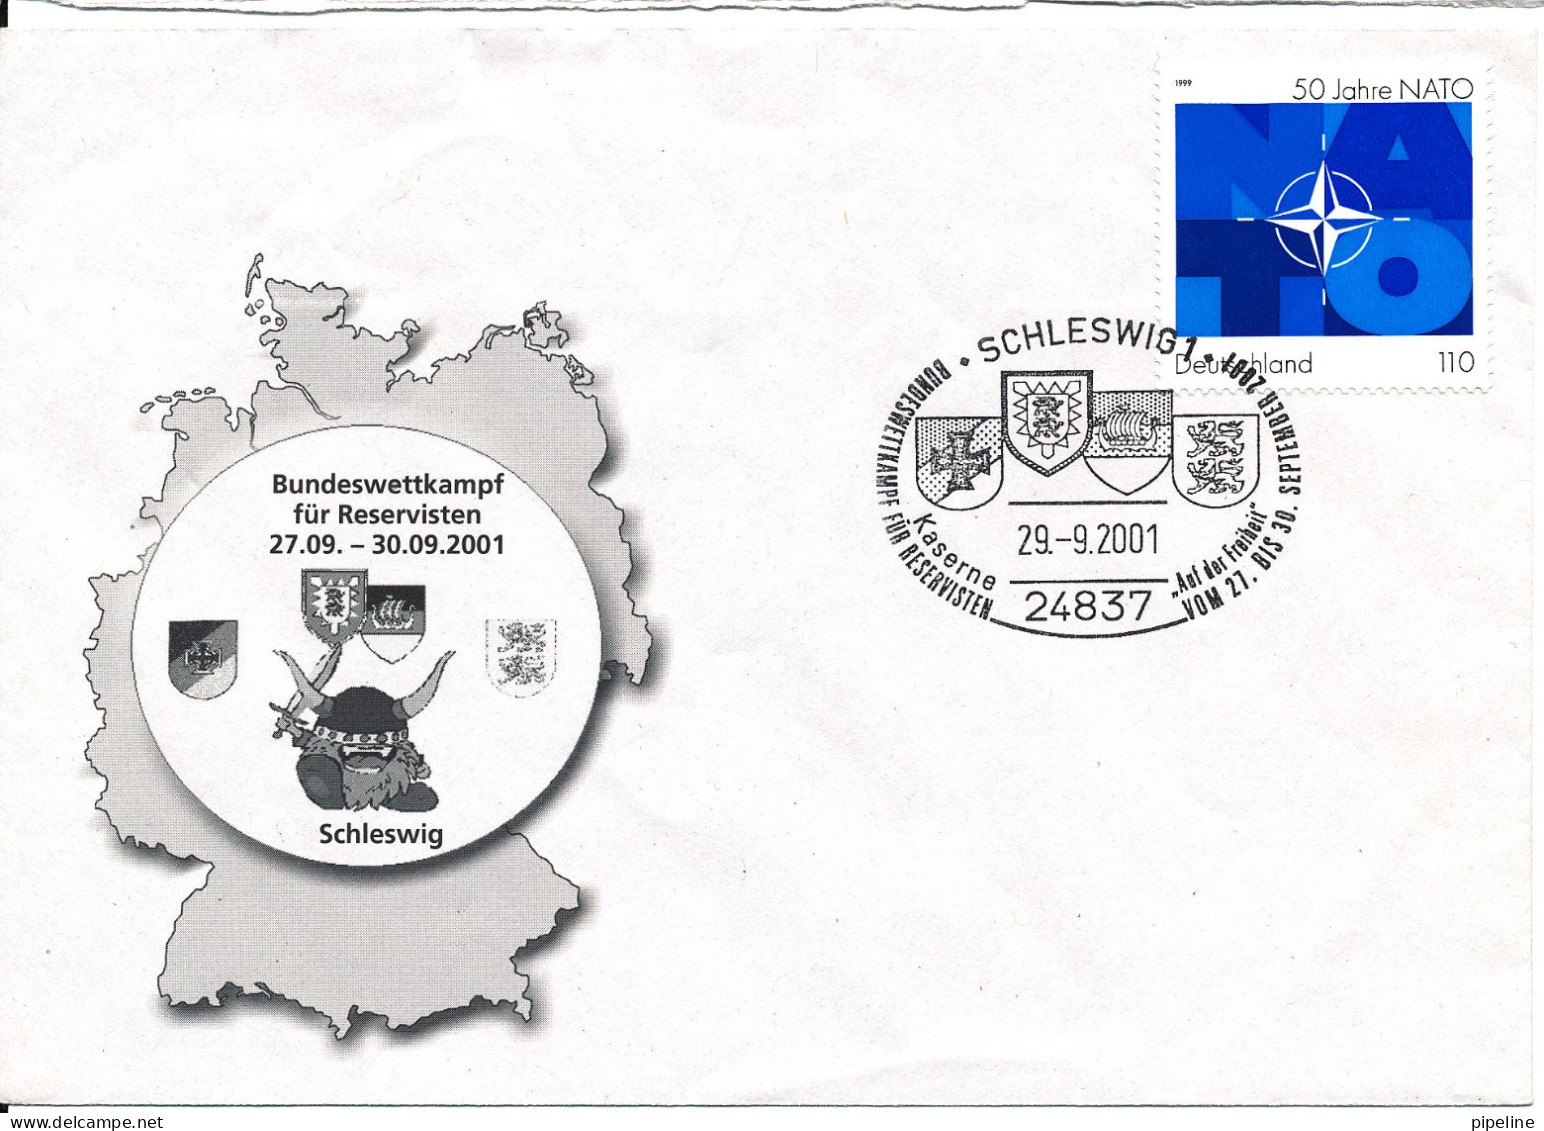 Germany Nice Cover With NATO Stamp 29-9-2001 With Cachet - NAVO